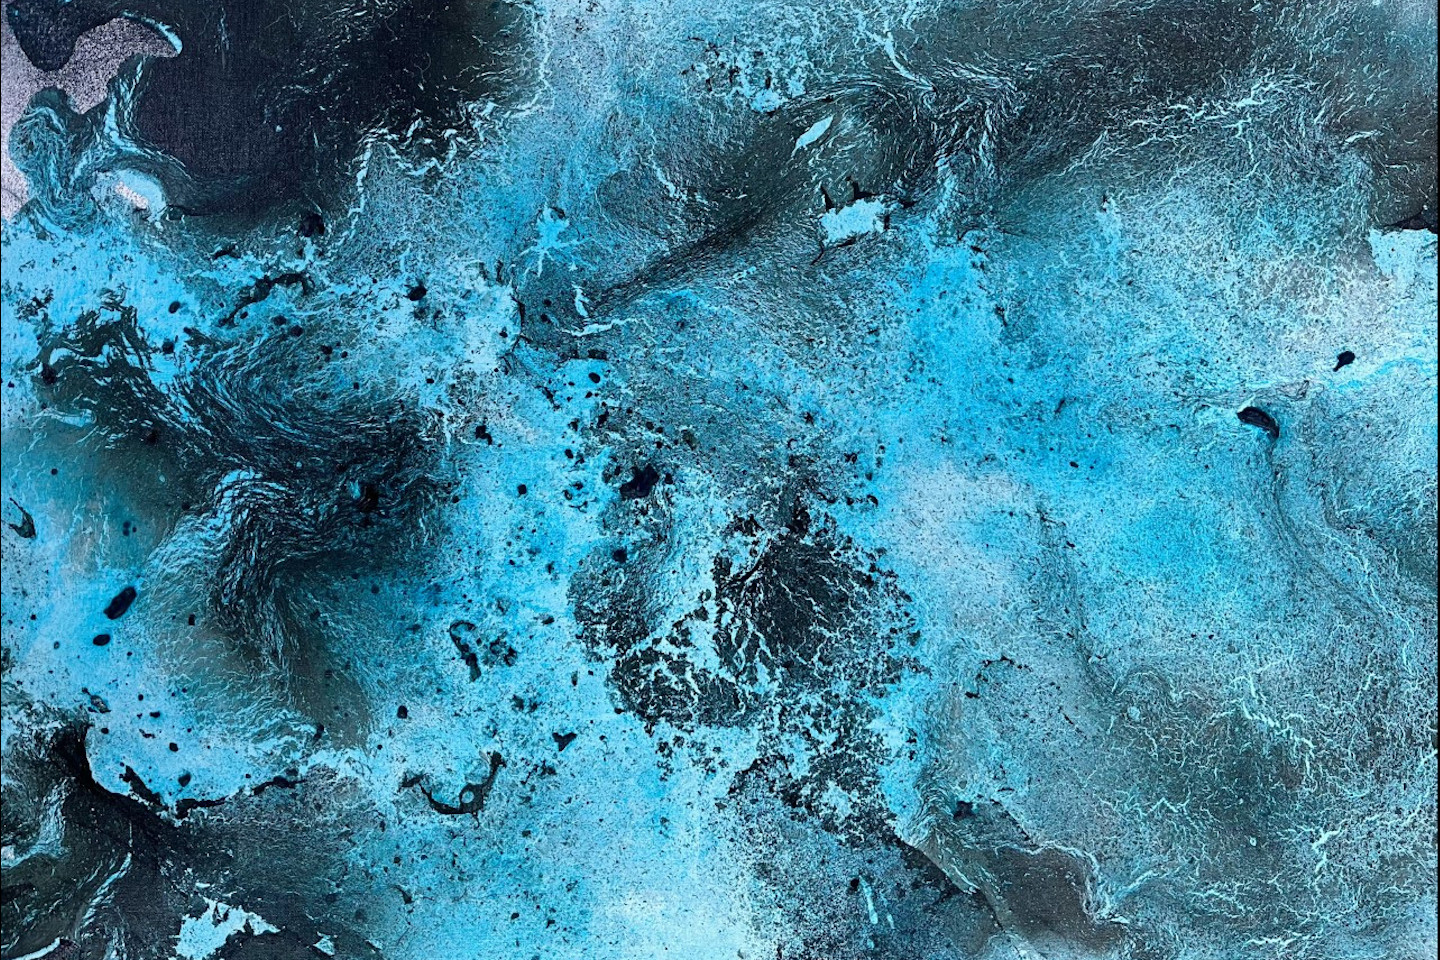 A blue, silver and grey metallic water-colour abstract painting